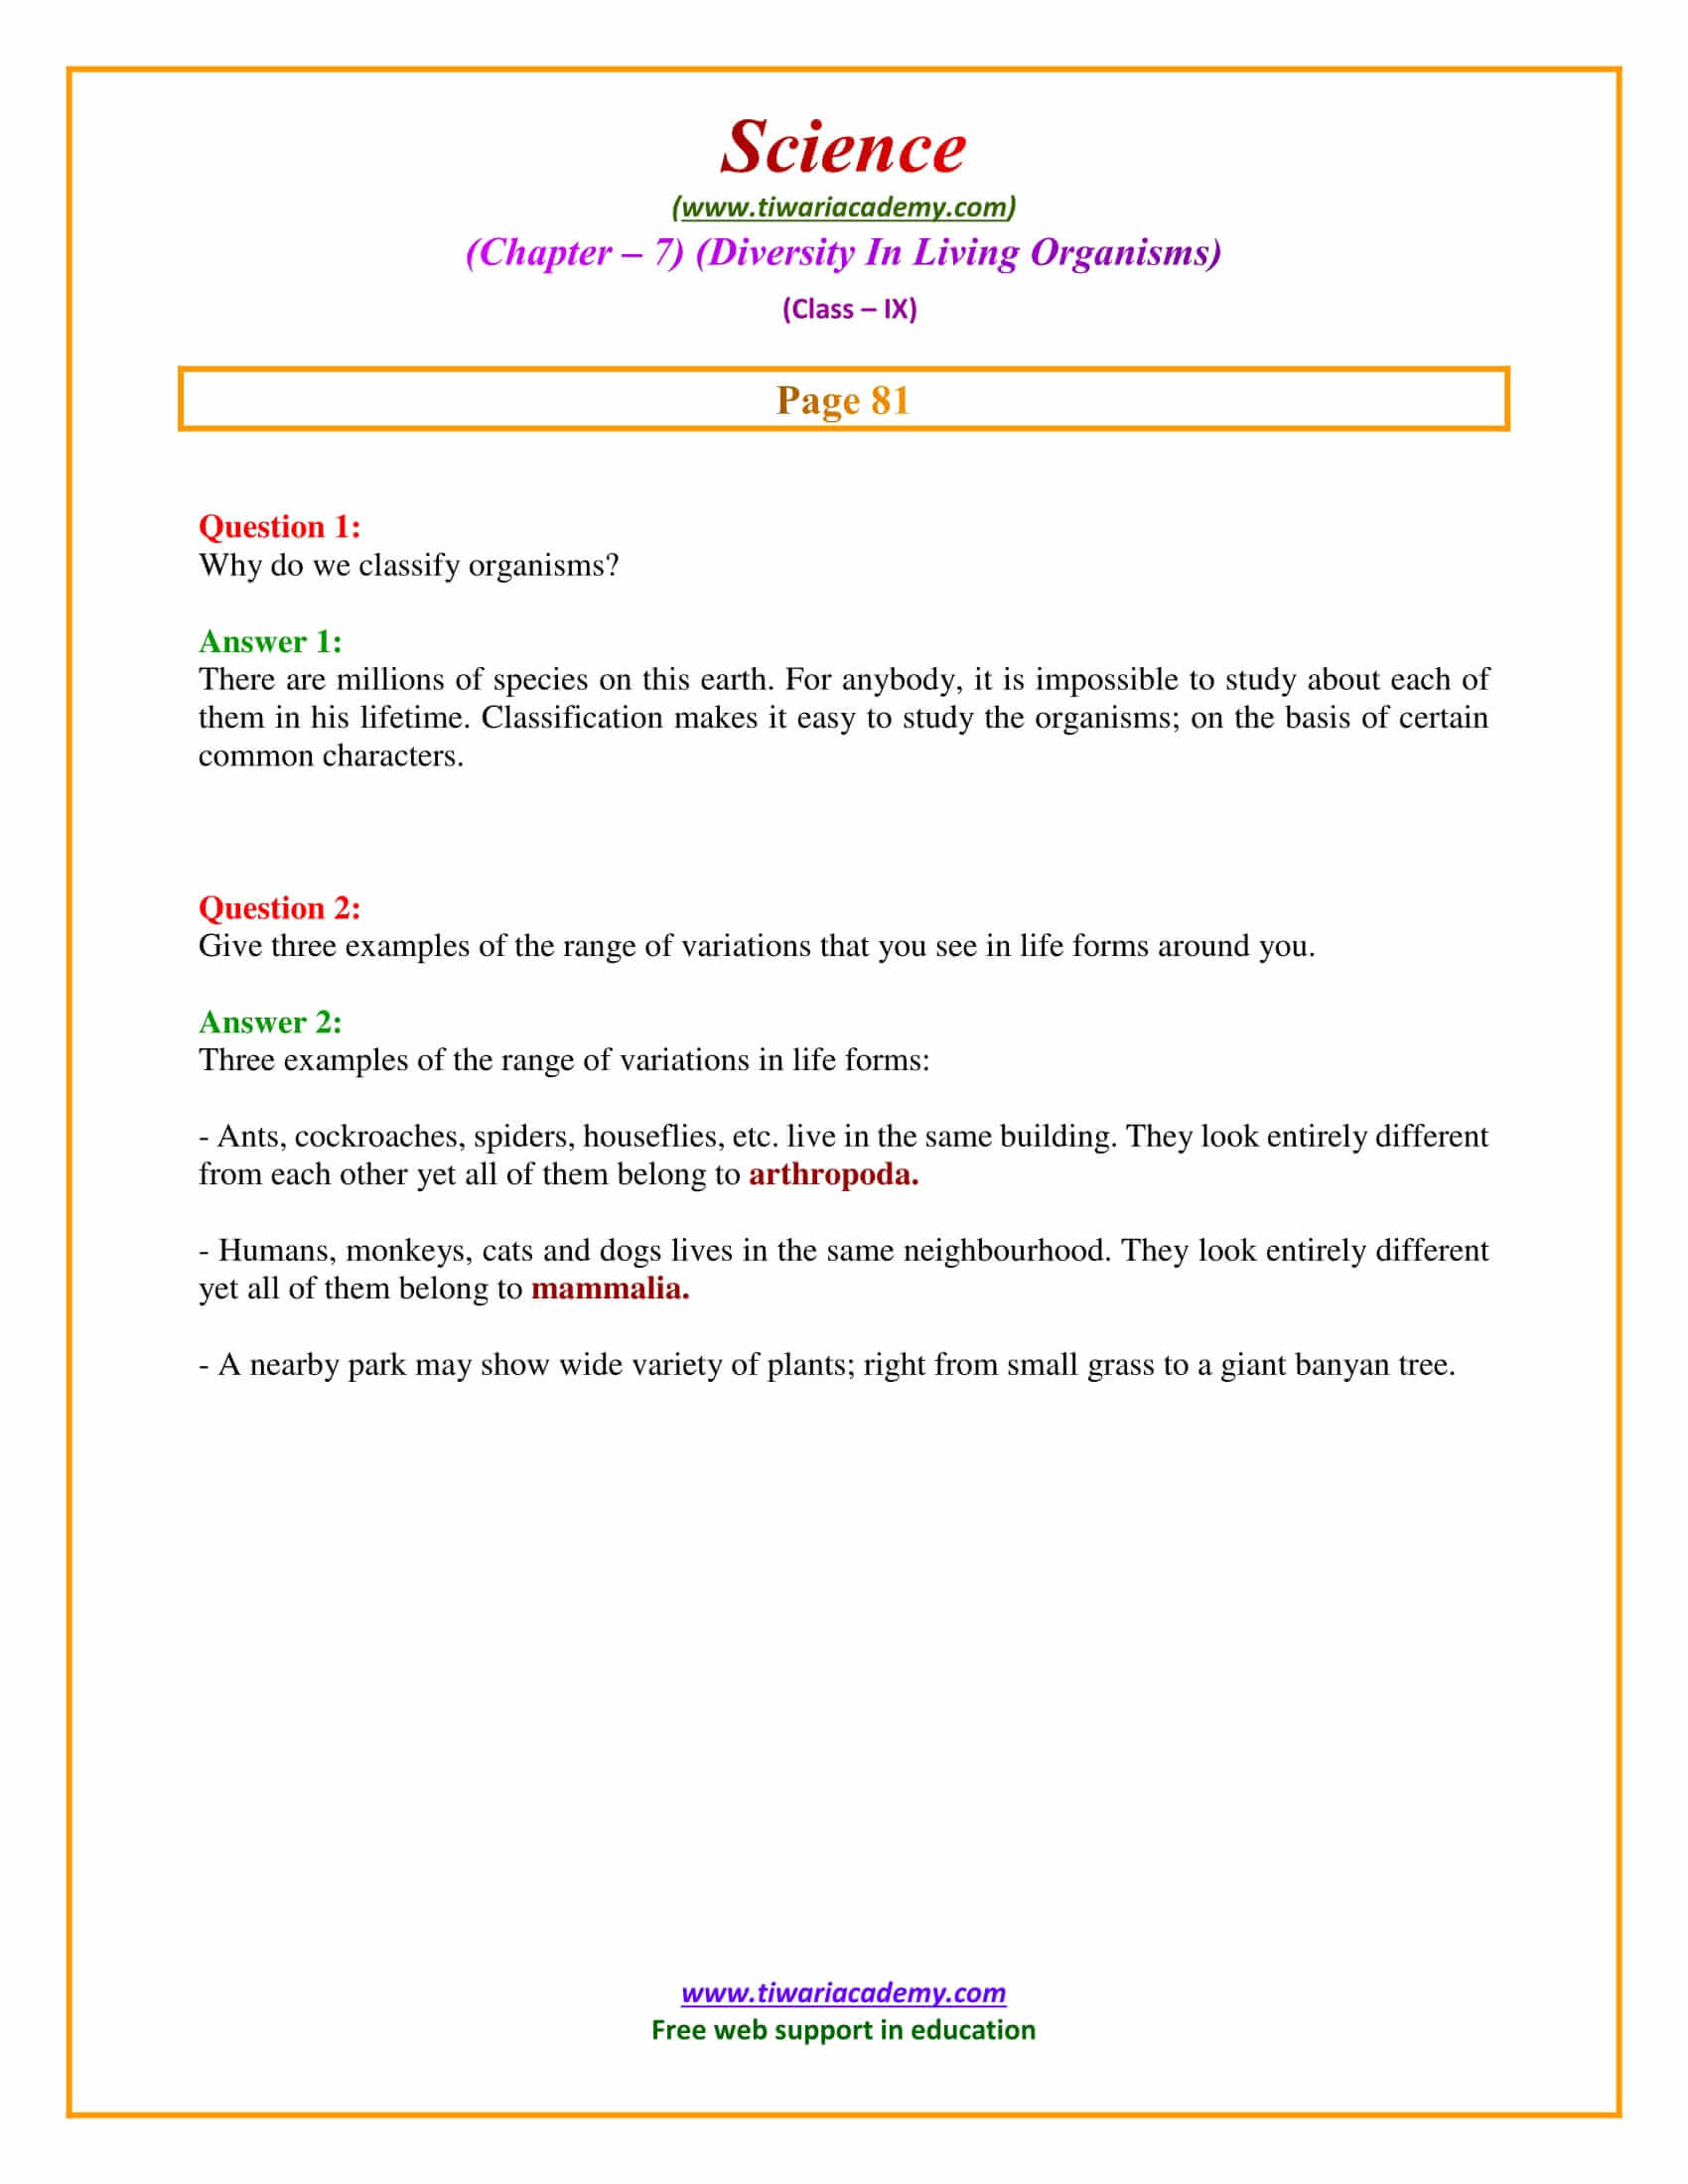 NCERT Solutions for Class 9 Science Chapter 7 Diversity in Living